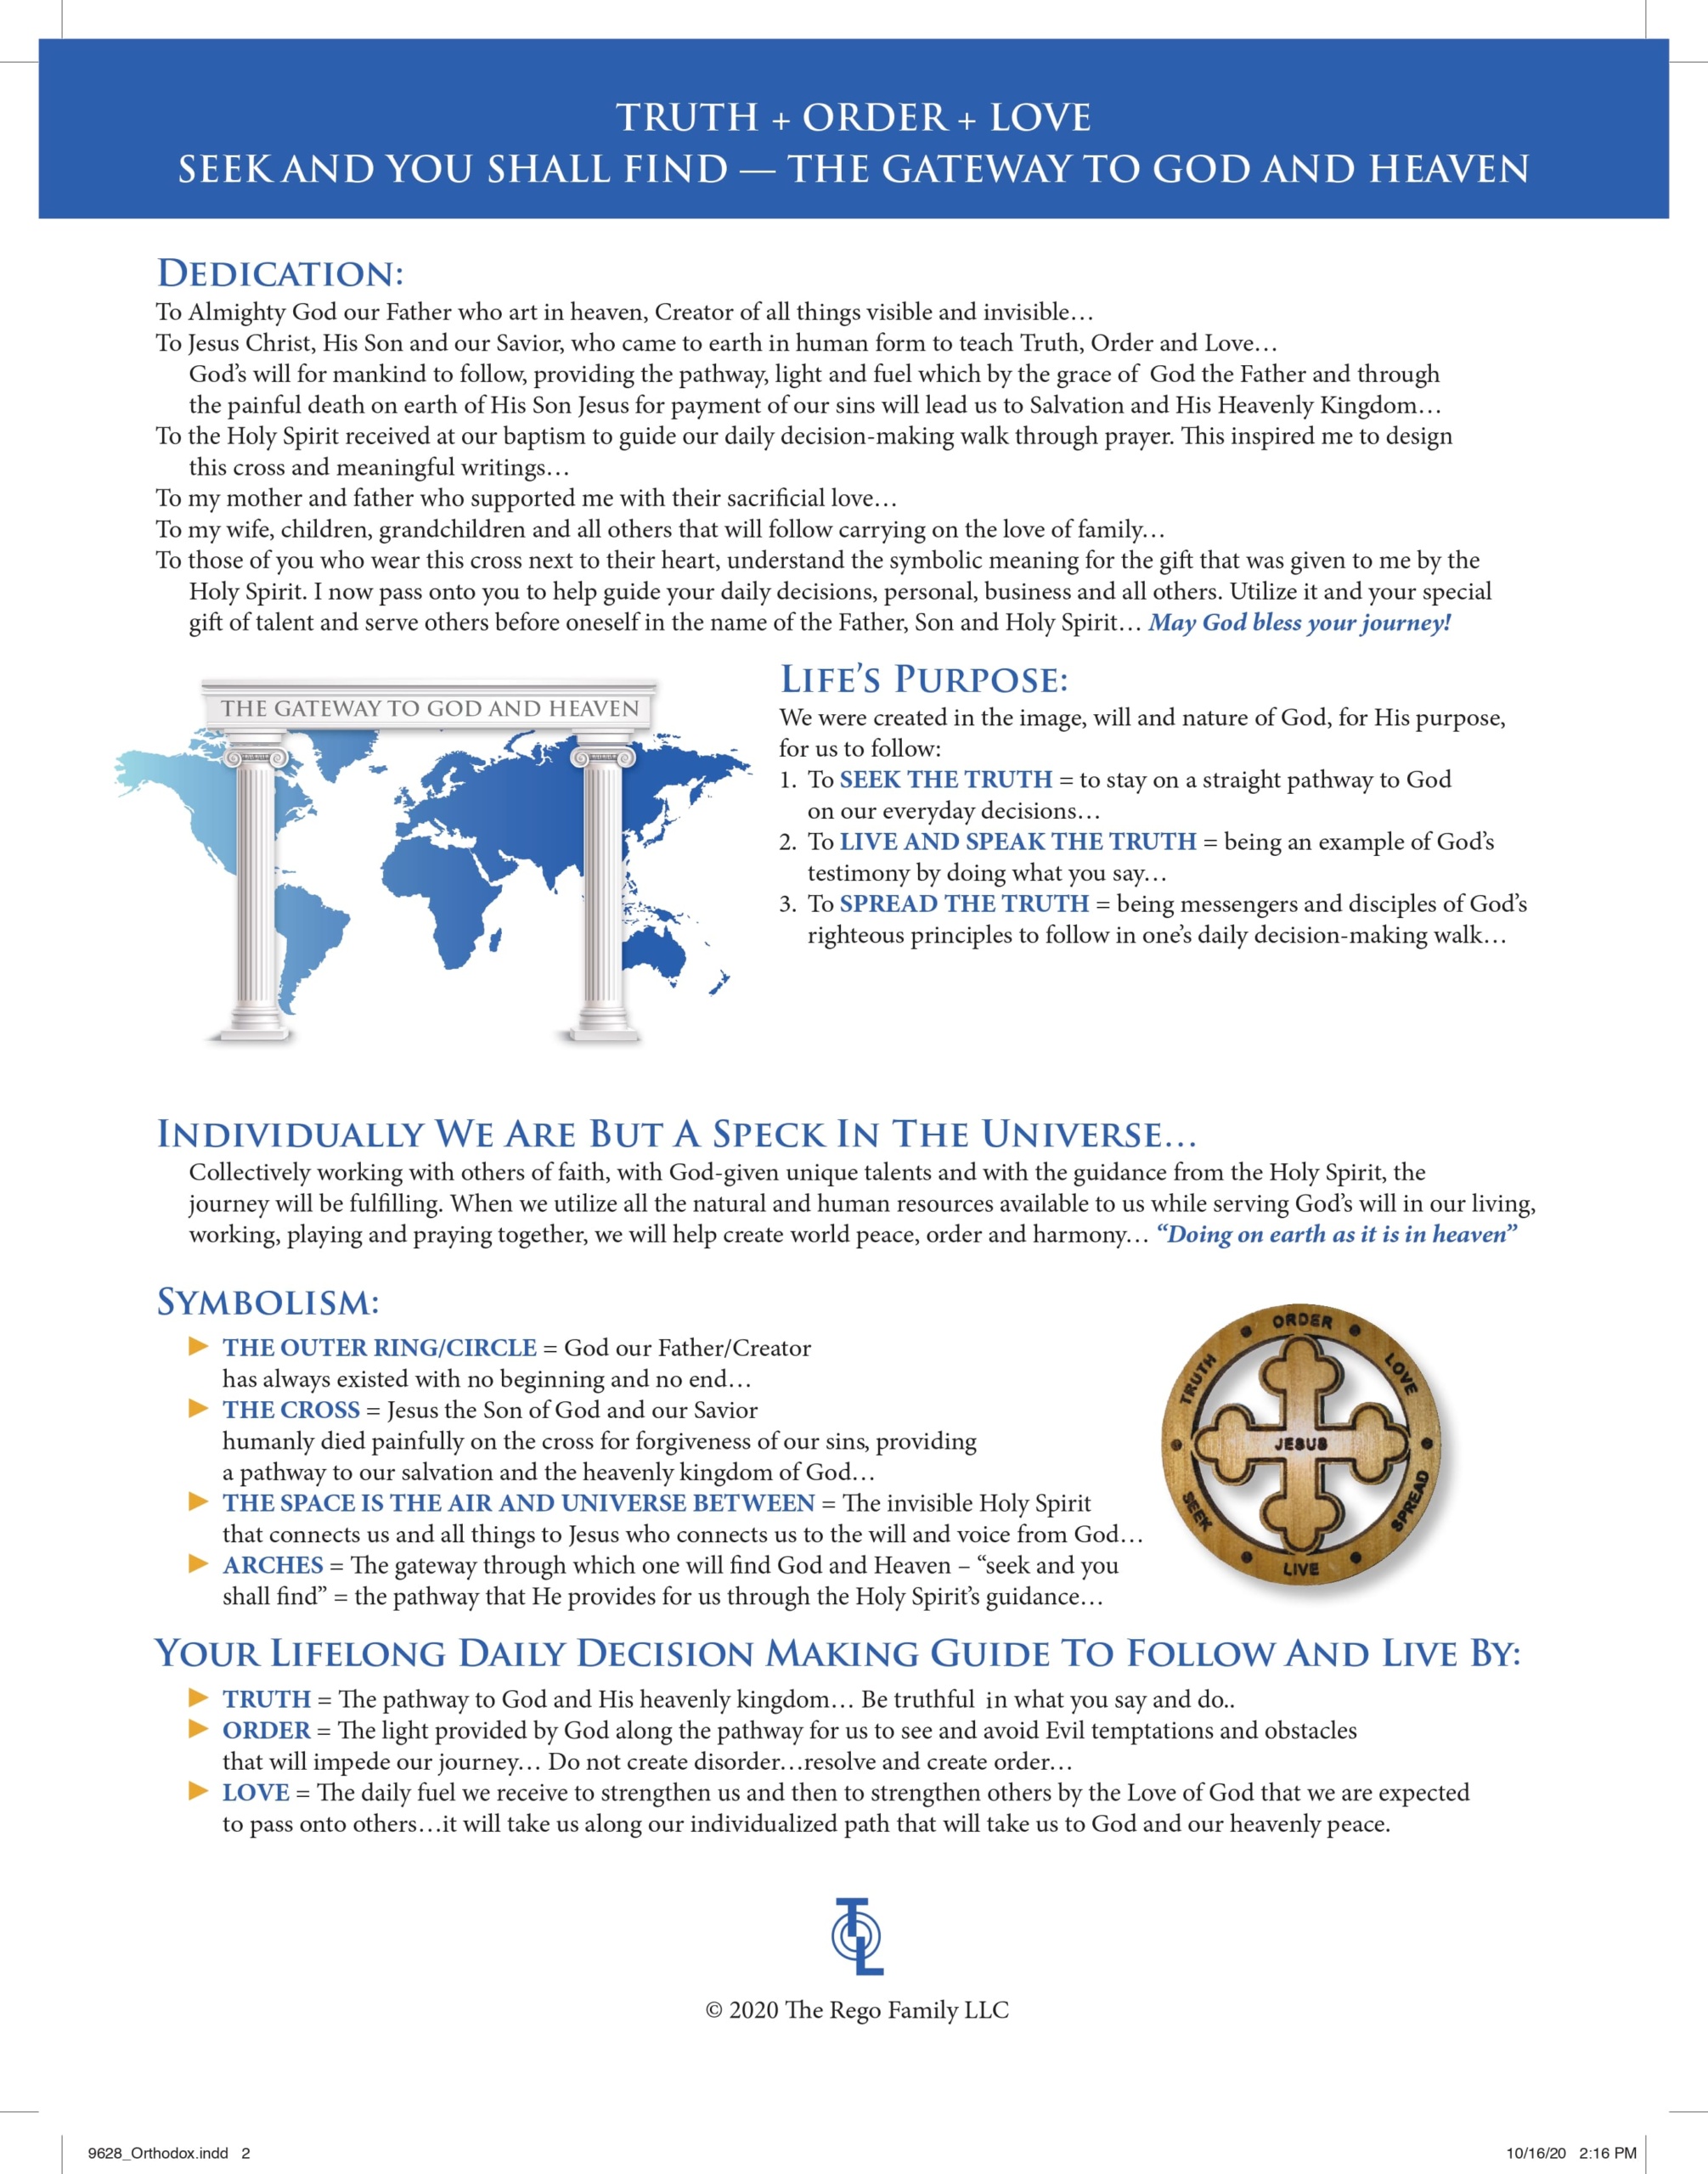 A page of information about the universal passport.